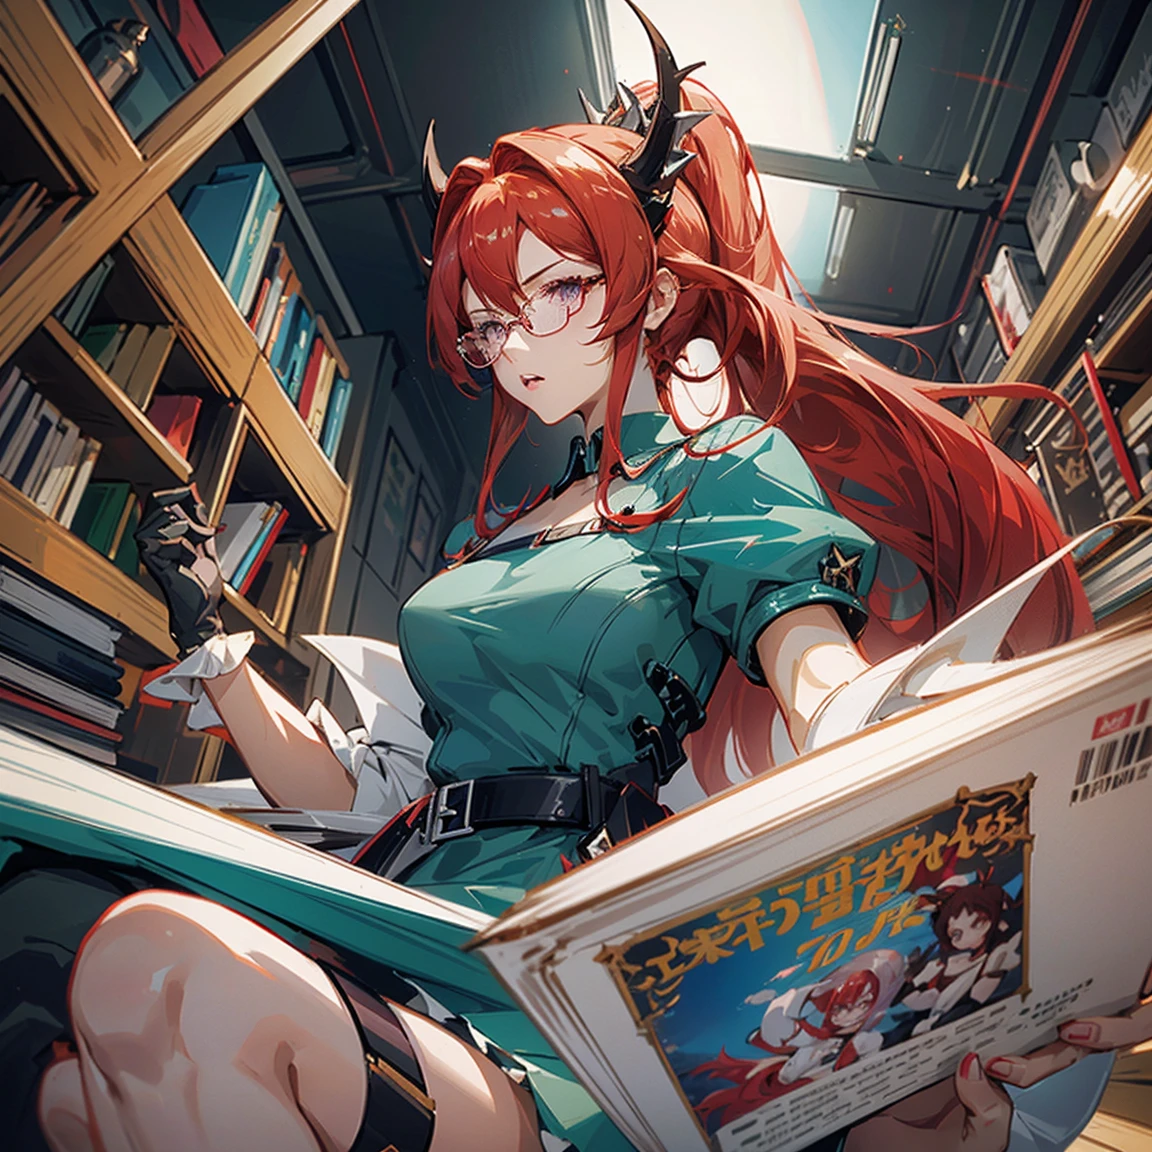 Mature anime girl (28 years old), red hair, high ponytail, one white streak of hair in the front, crystal hair band , ((glasses)), librarian dress, shoulder pads that look like wings, color palette red gold and teal, books